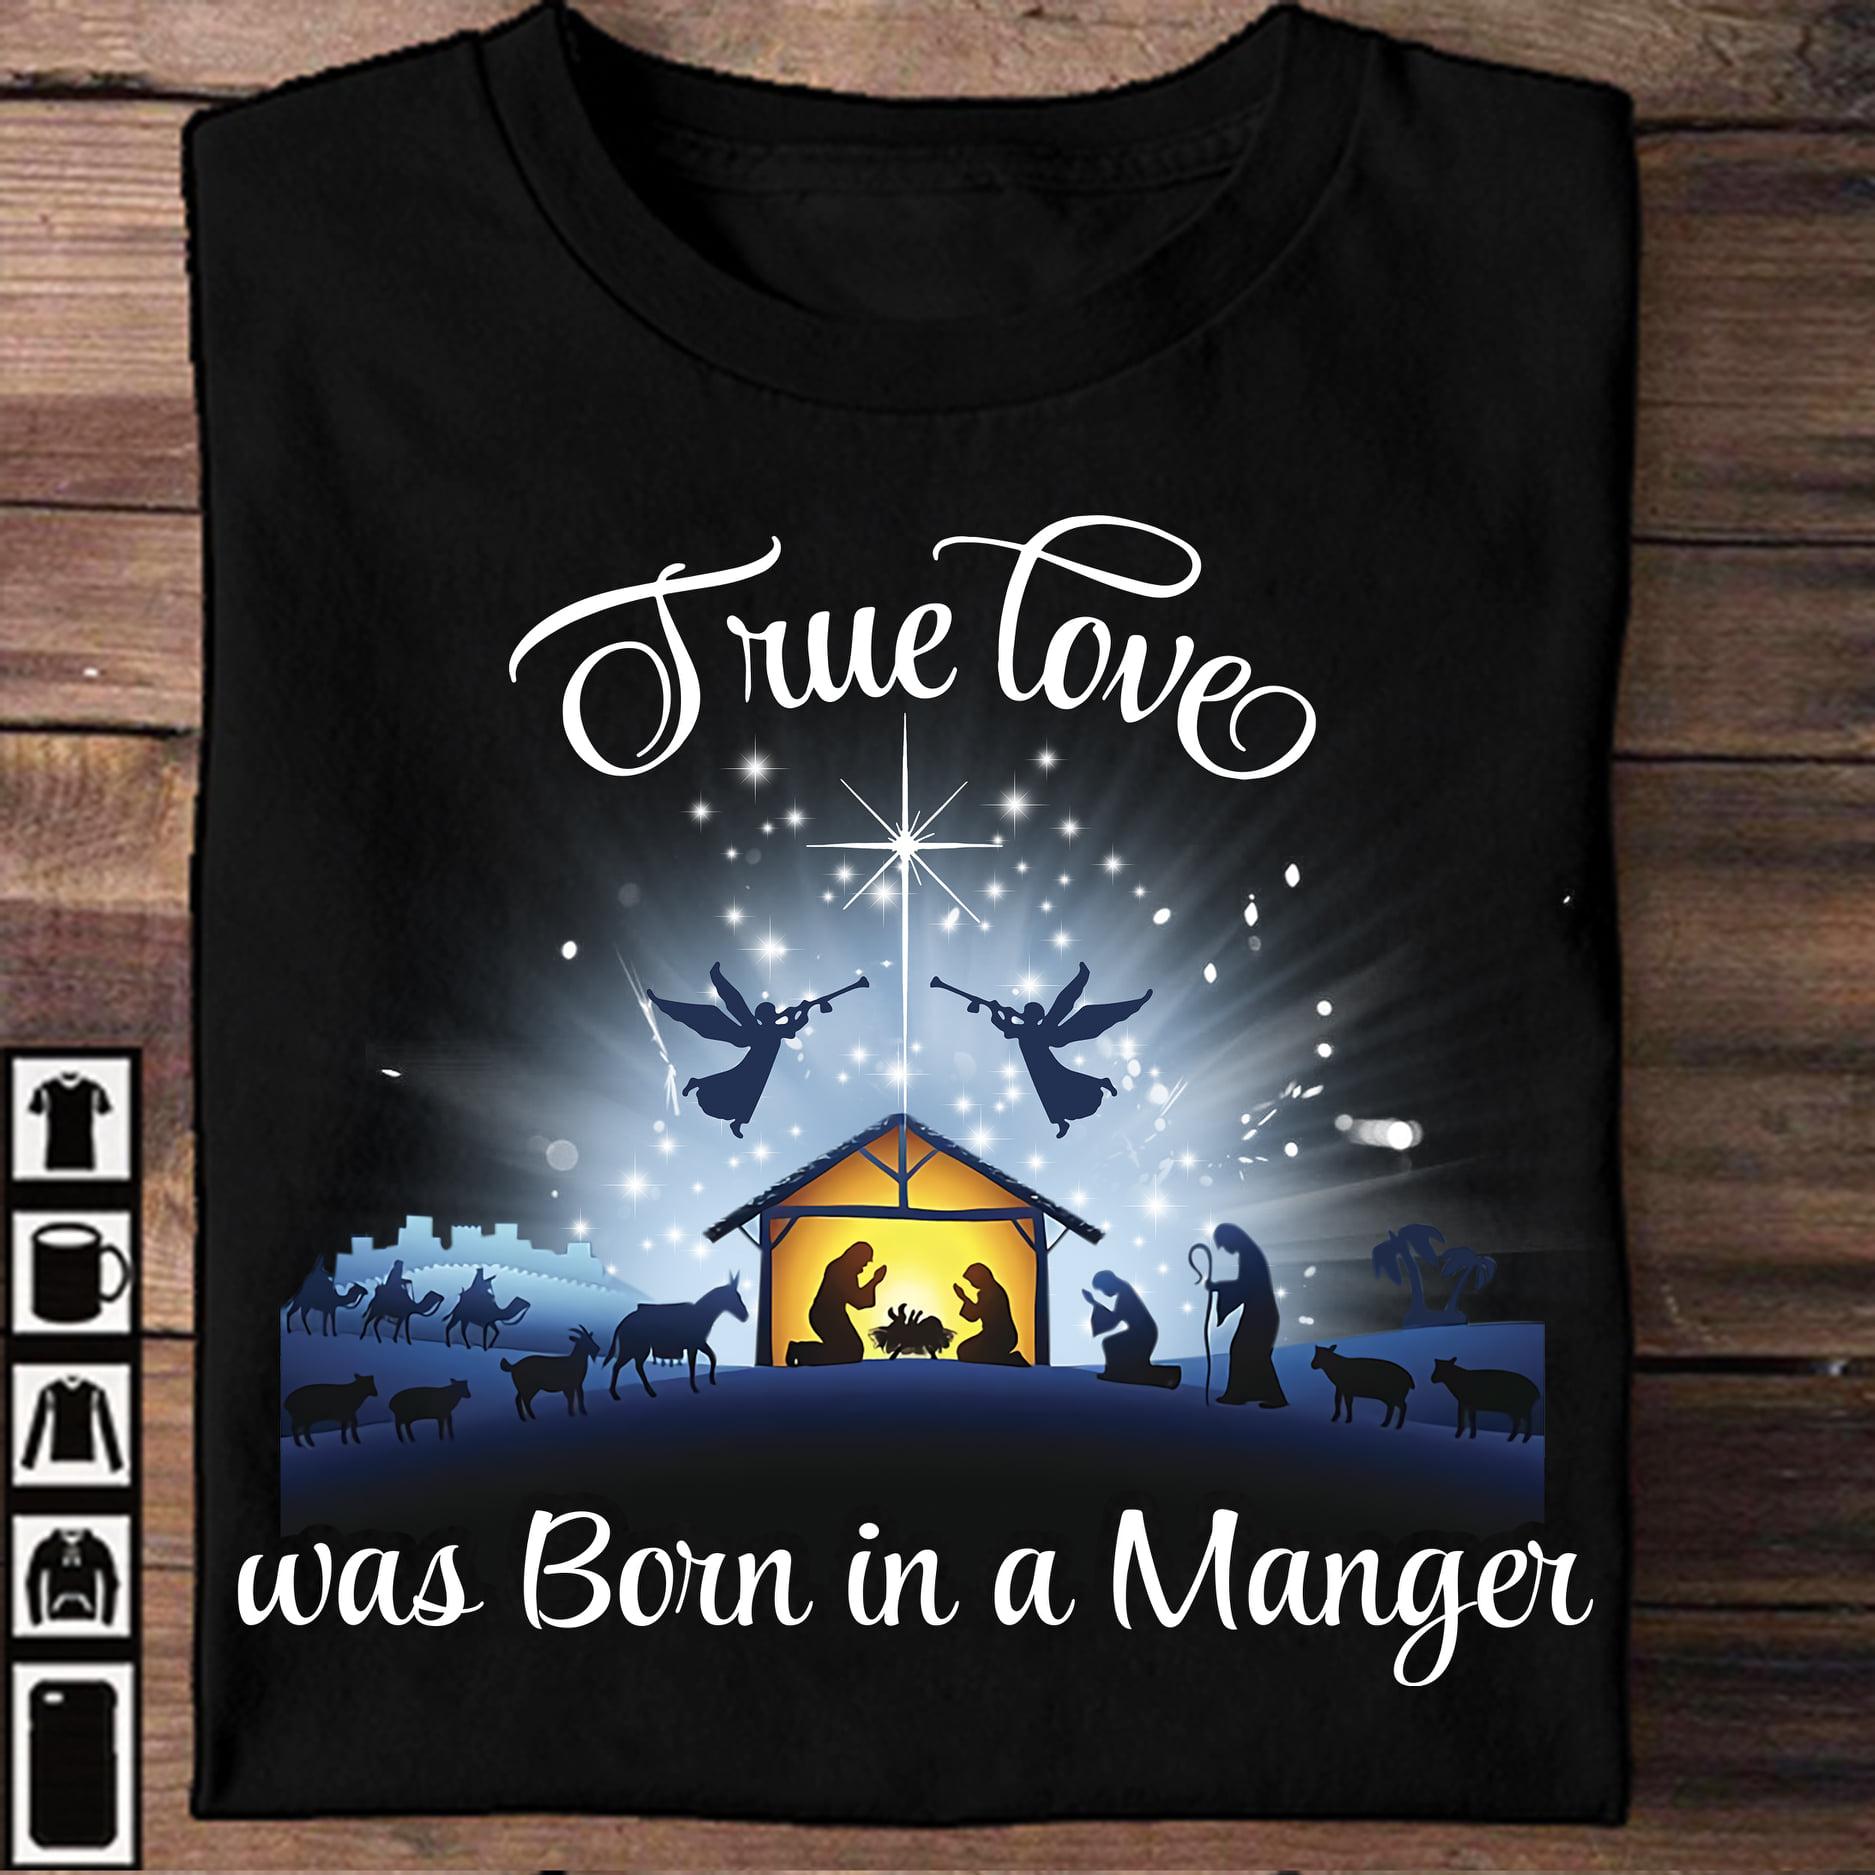 True love was born in a manger - Christmas day ugly sweater, Jesus date of birth